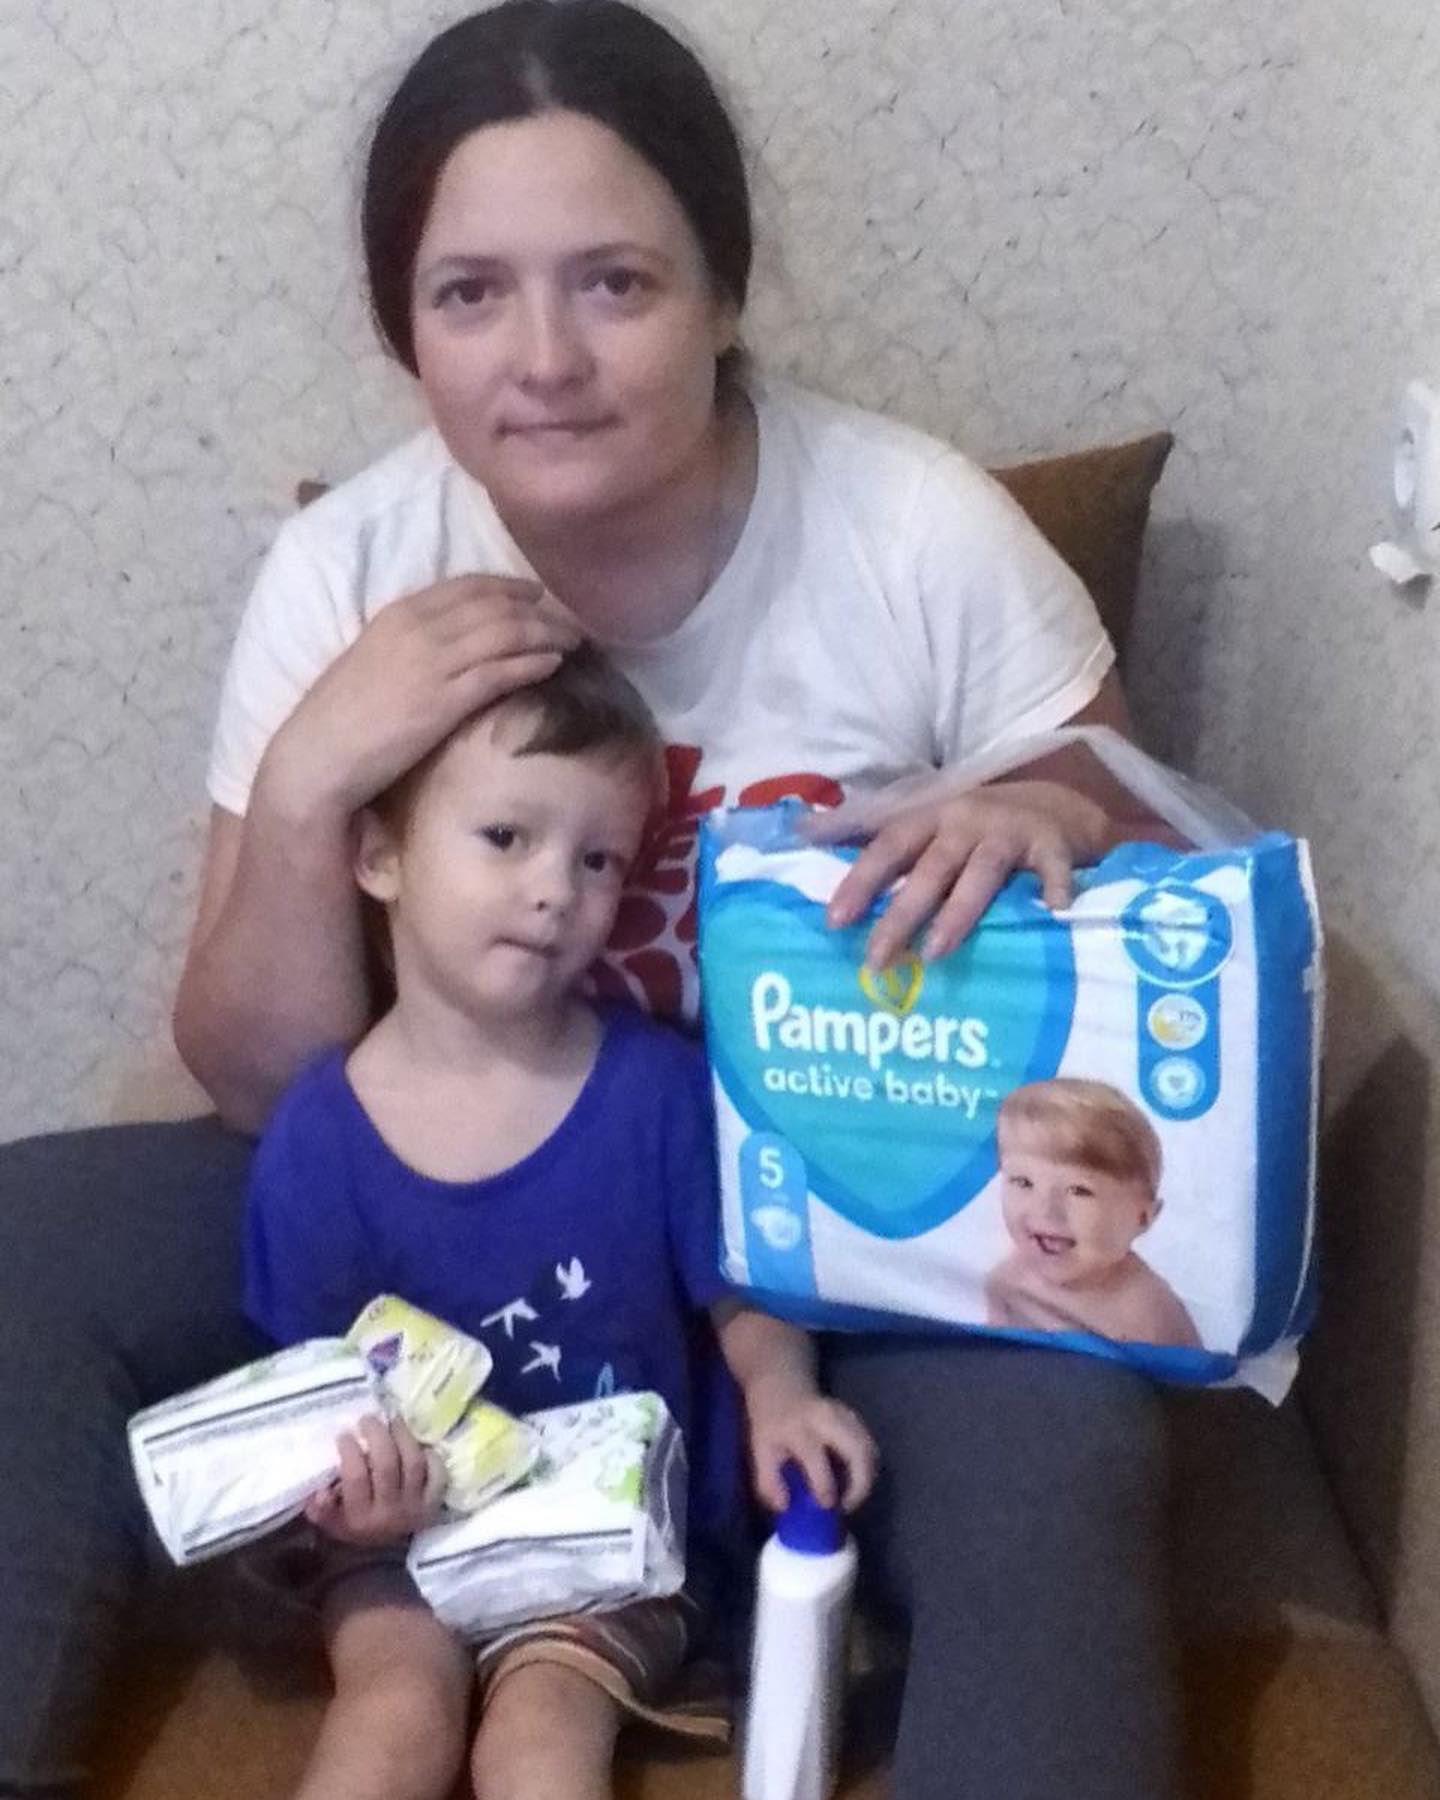 A woman and child sitting on a couch with a pack of pampers diapers.